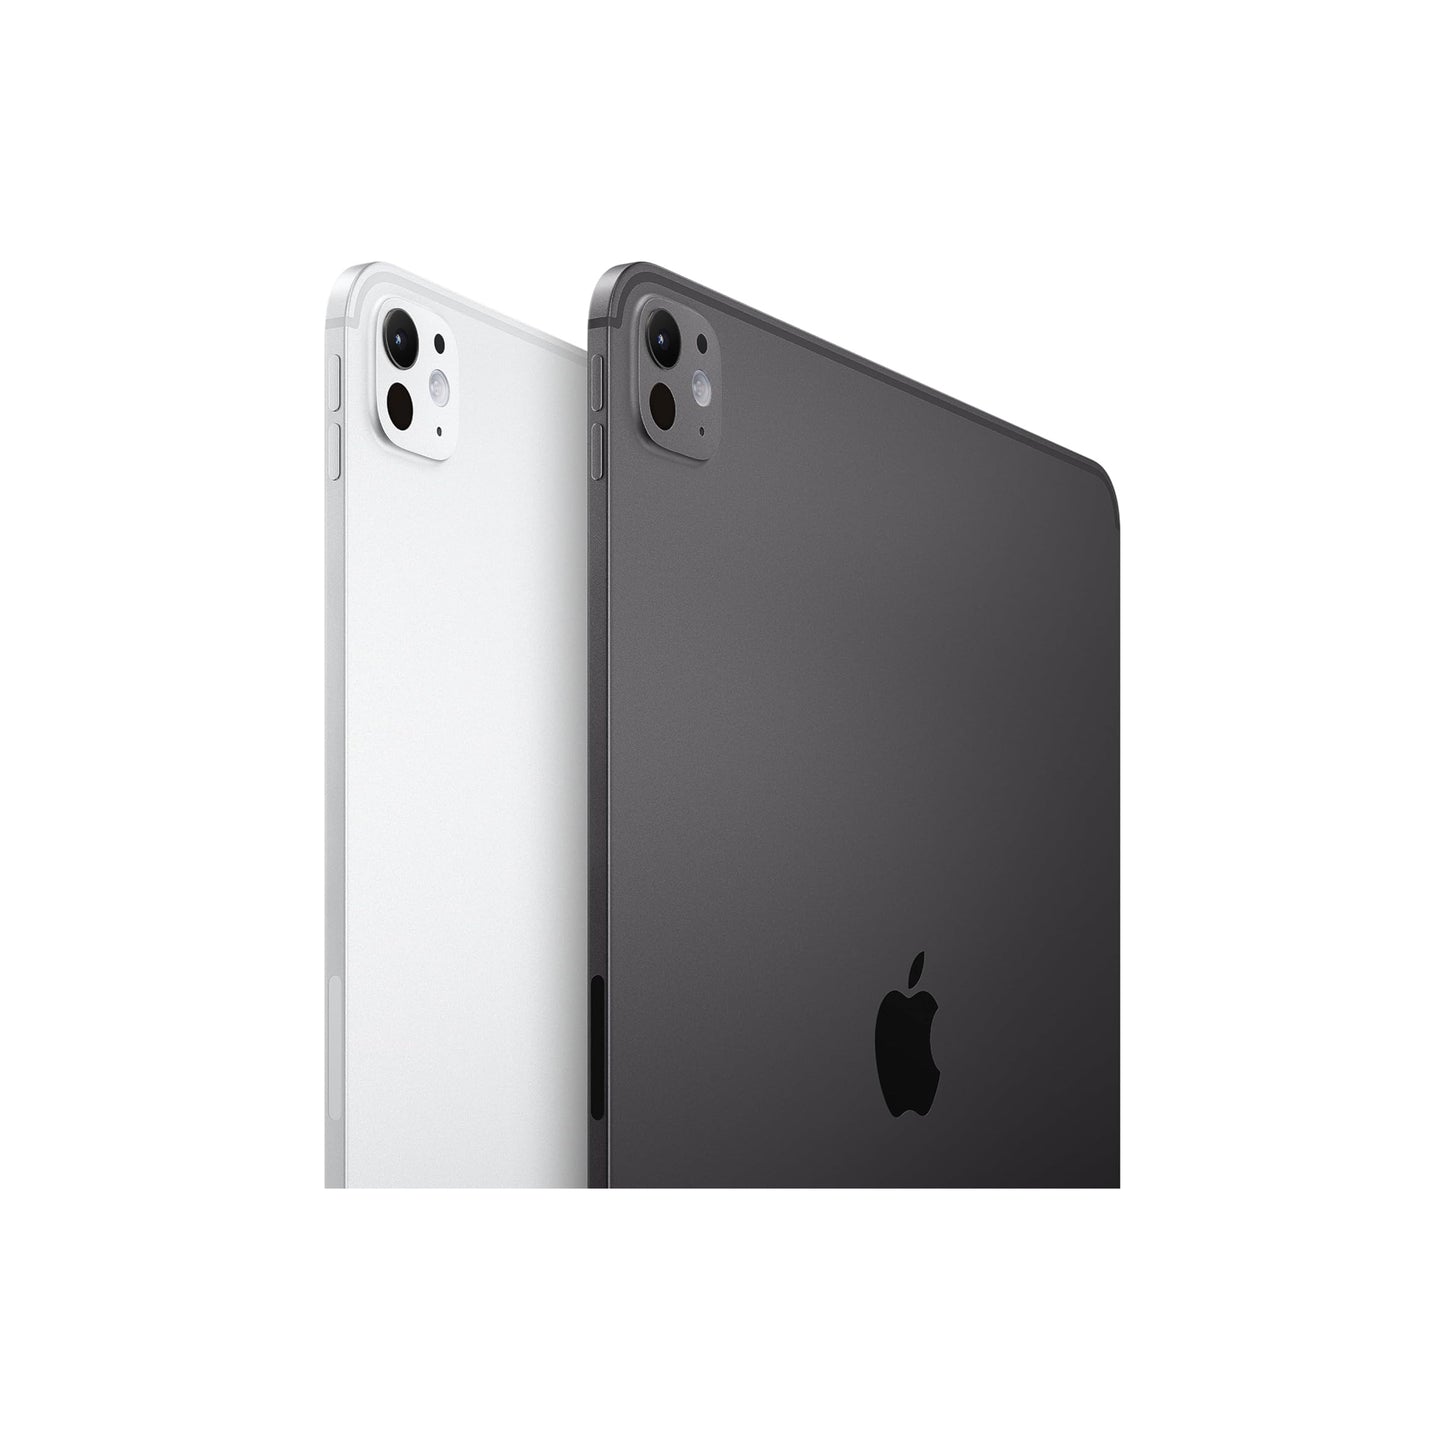 Apple iPad Pro 11-Inch (M4): Ultra Retina XDR Display, 1TB, Landscape 12MP Front Camera/12MP Back Camera, LiDAR Scanner, Wi-Fi 6E + 5G Cellular with eSIM, Face ID, All-Day Battery Life — Space Black